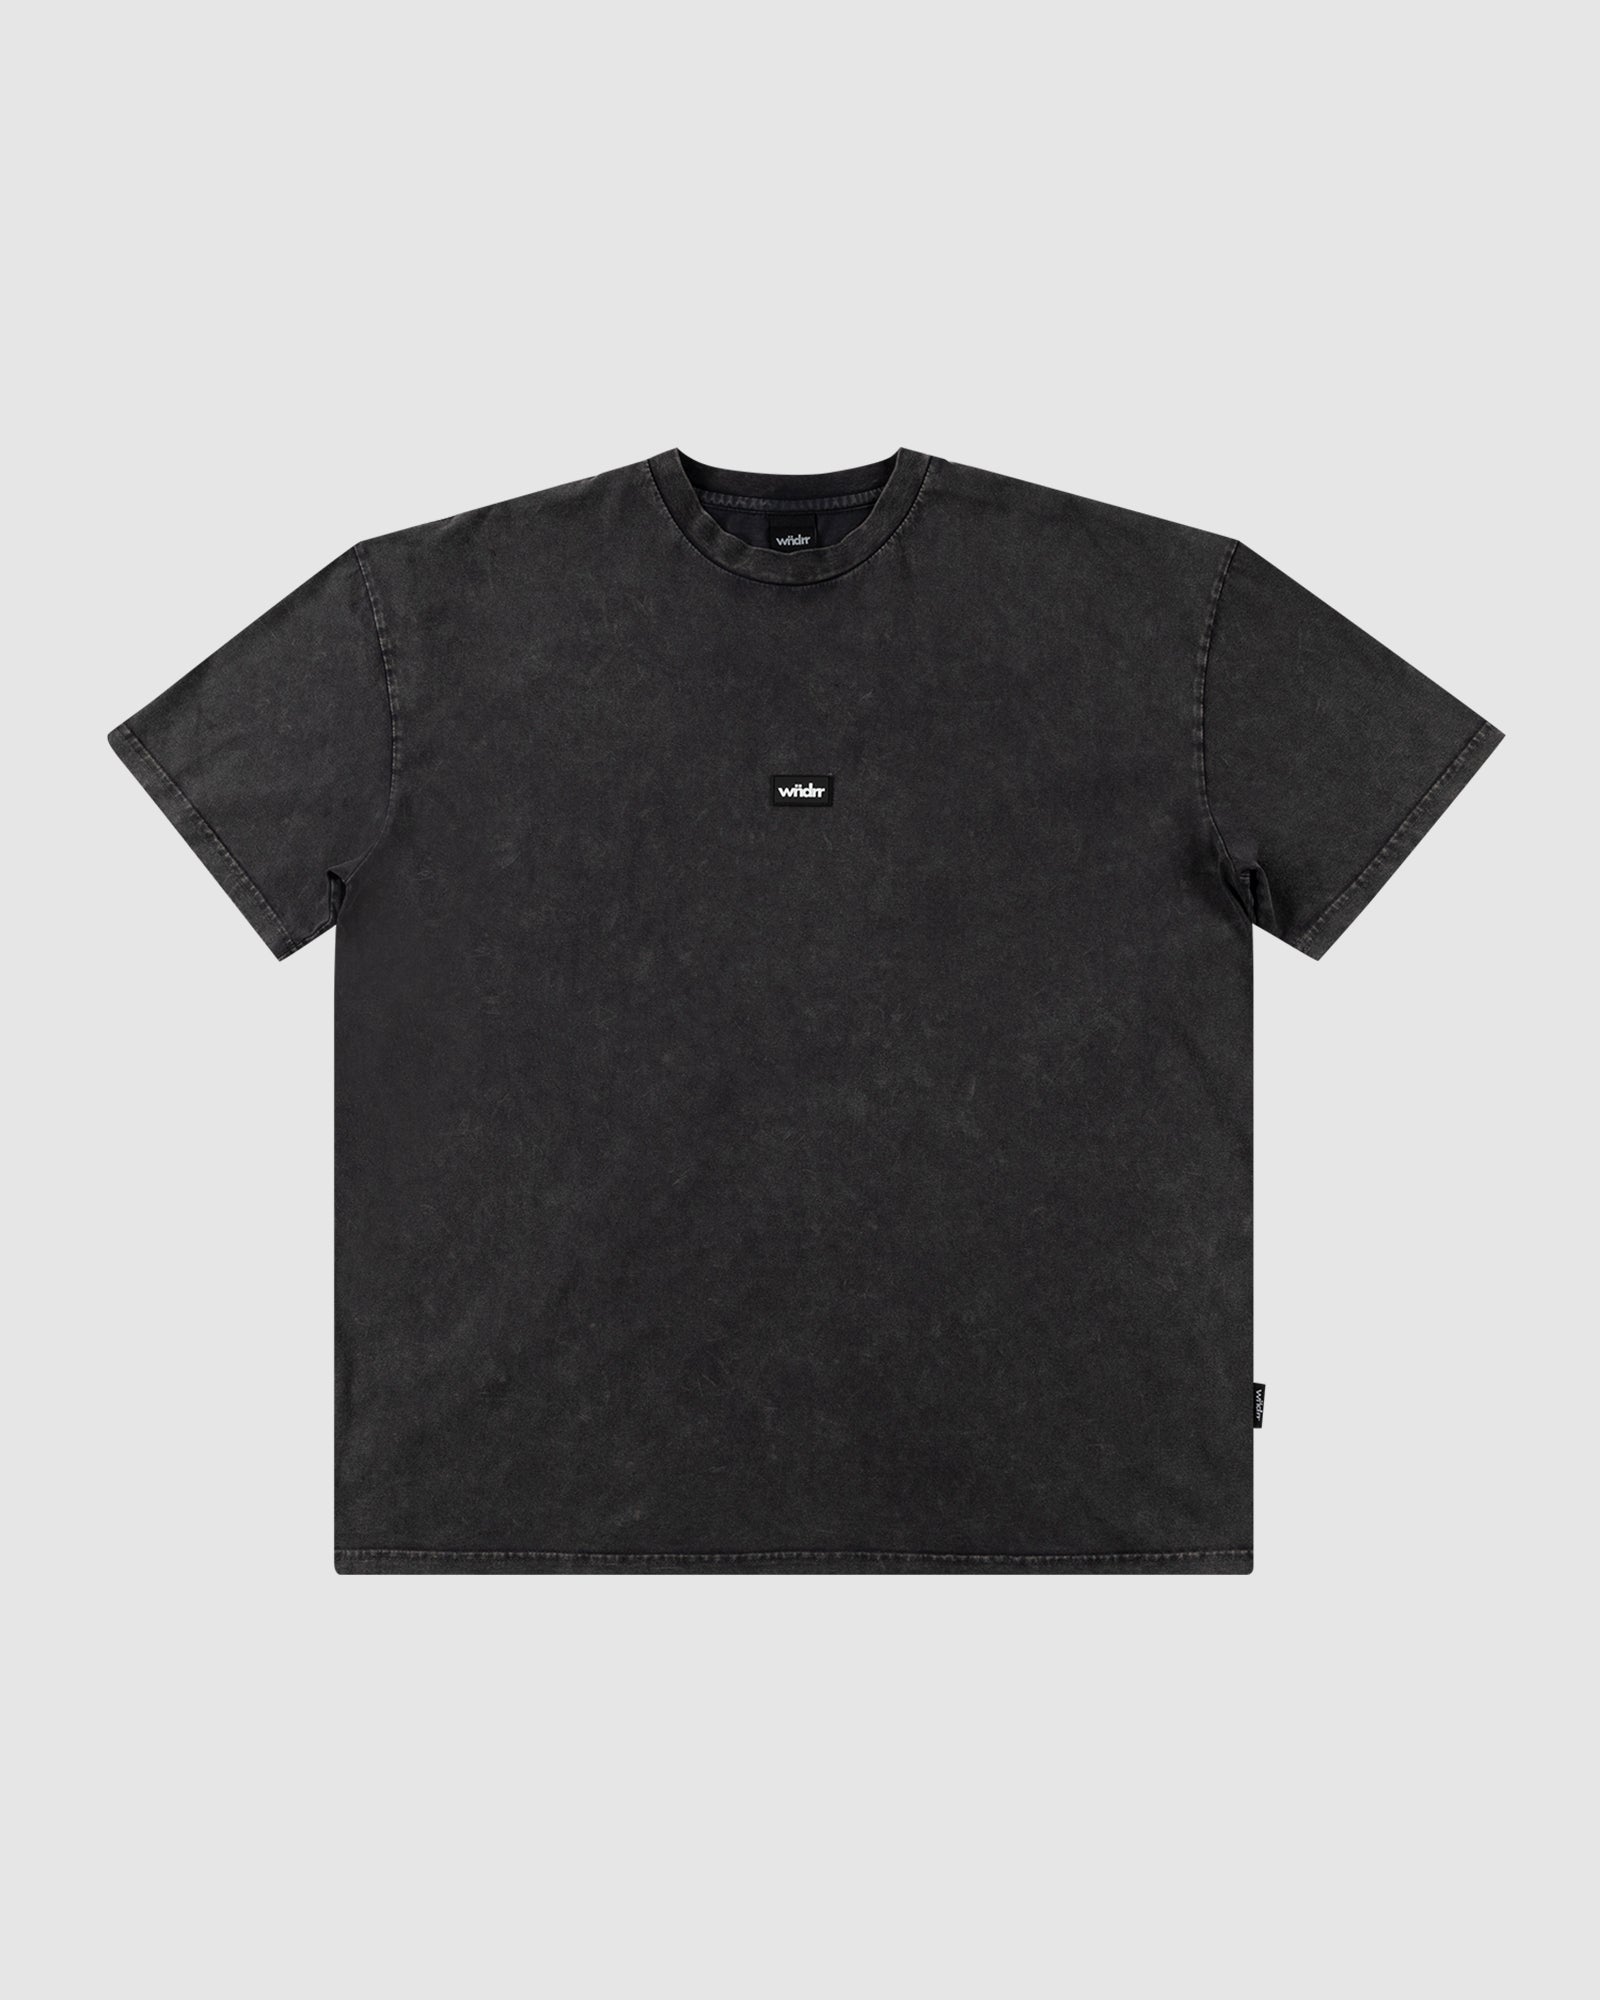 HOXTON VINTAGE FIT TEE - WASHED BLACK